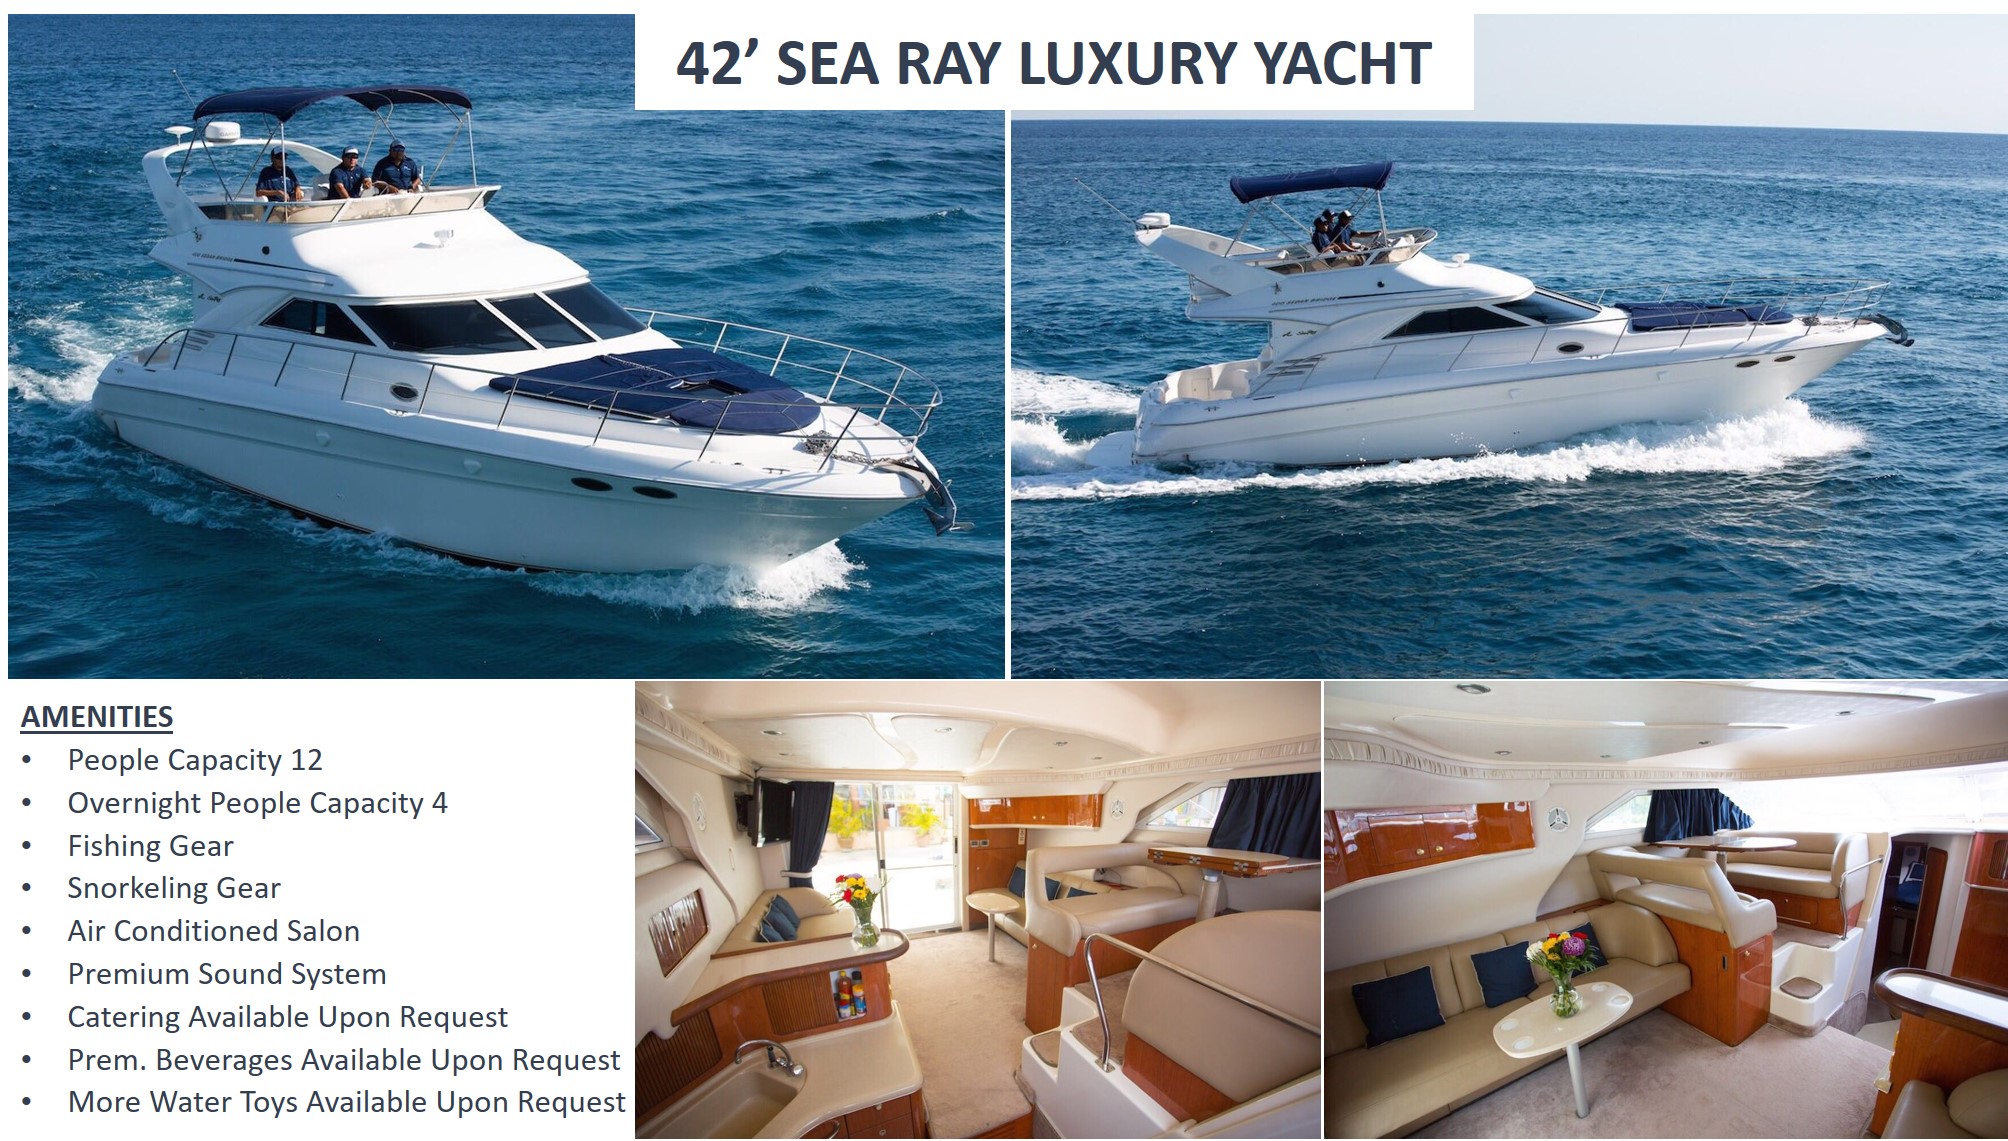 42′ Sea Ray Luxury Yacht  Luxury Yachts Charters Boat Rentals Cancun,  Mexico